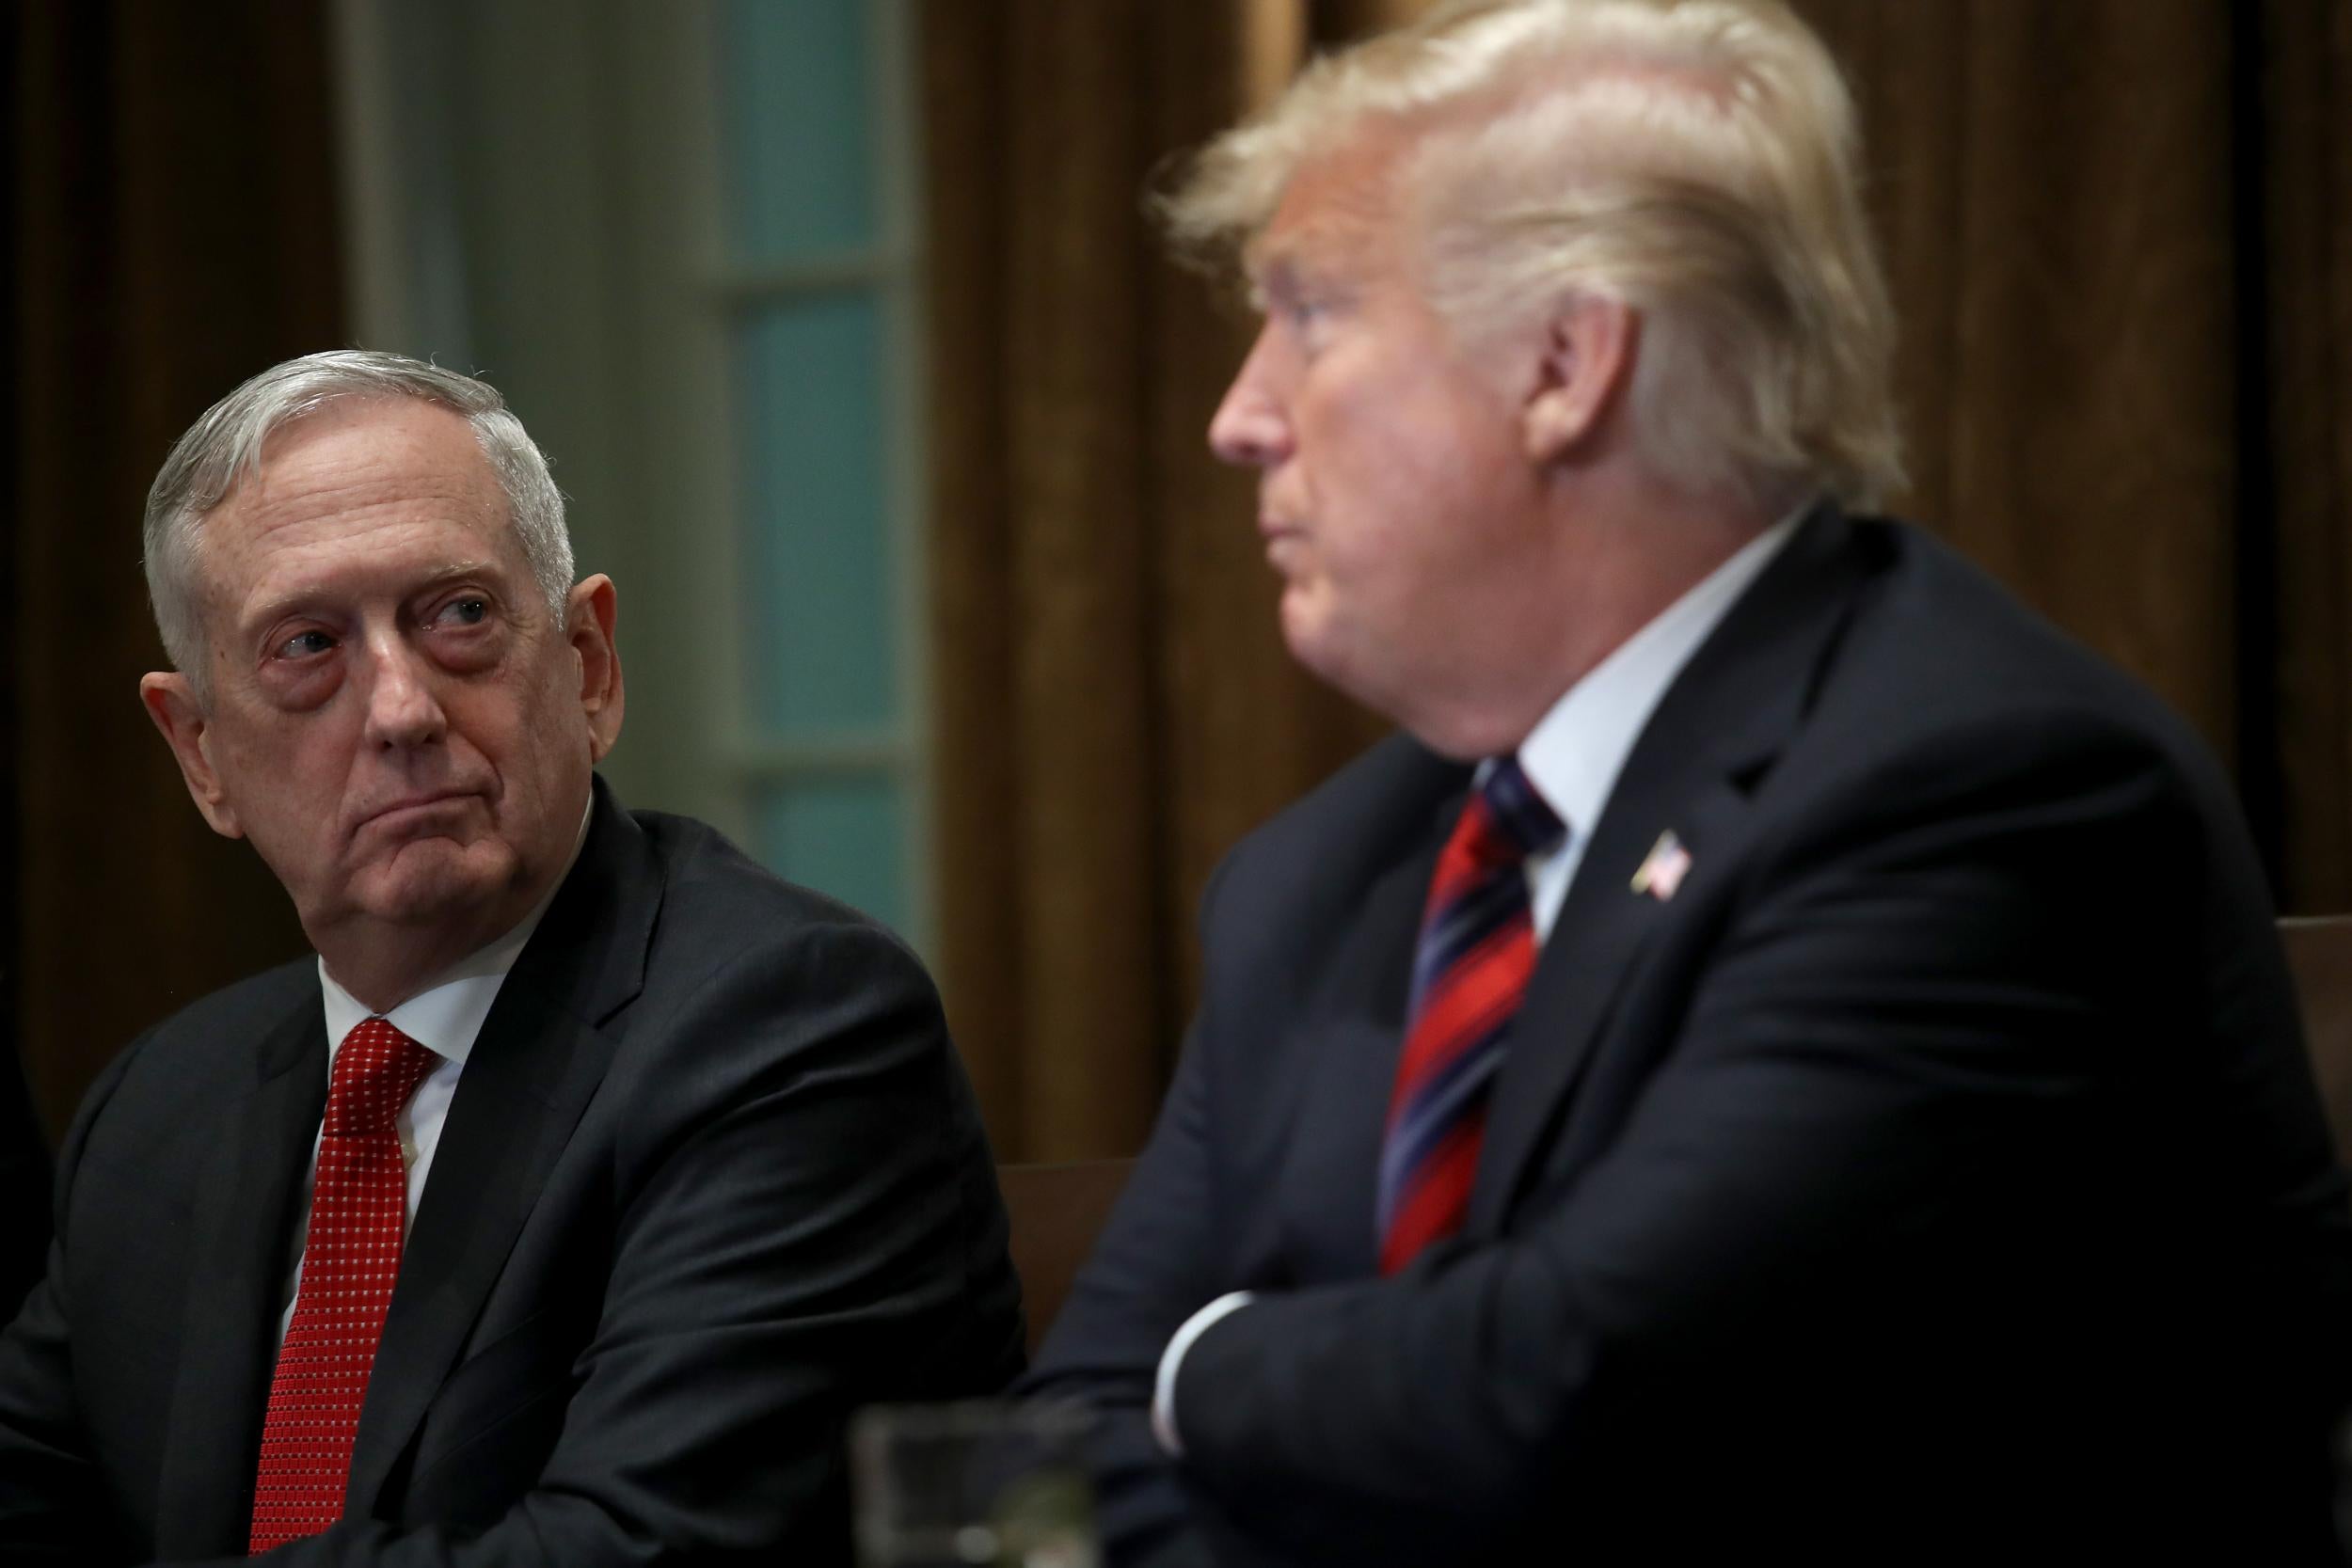 Did Mattis save us from the worst instincts of Donald Trump over the past two years?